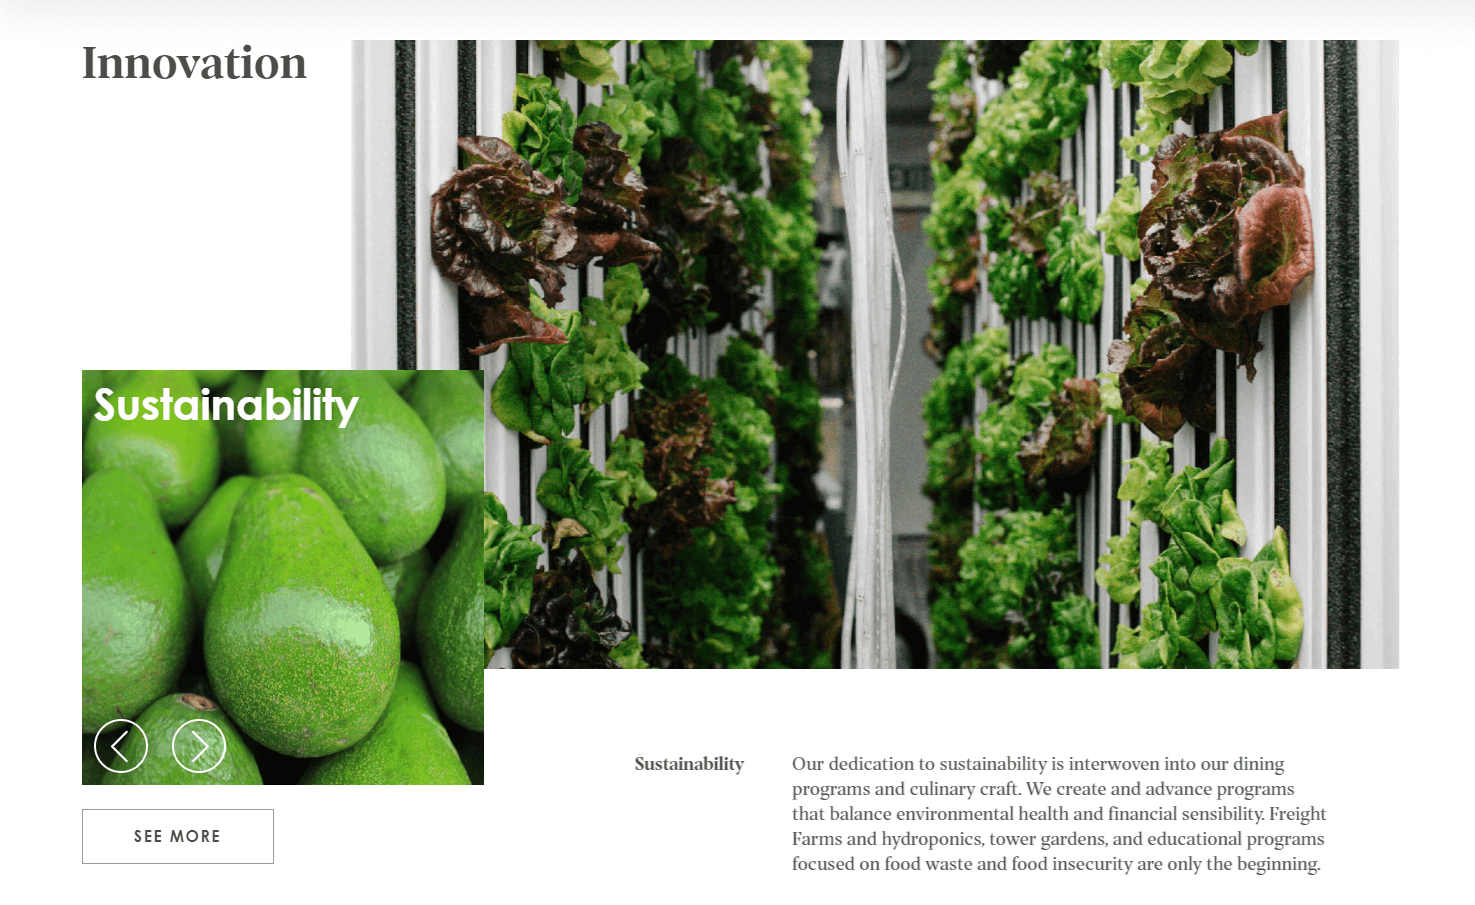 A page from Fresh Ideas Food website with green leaves and fruits showing they are working for innovation and sustainability